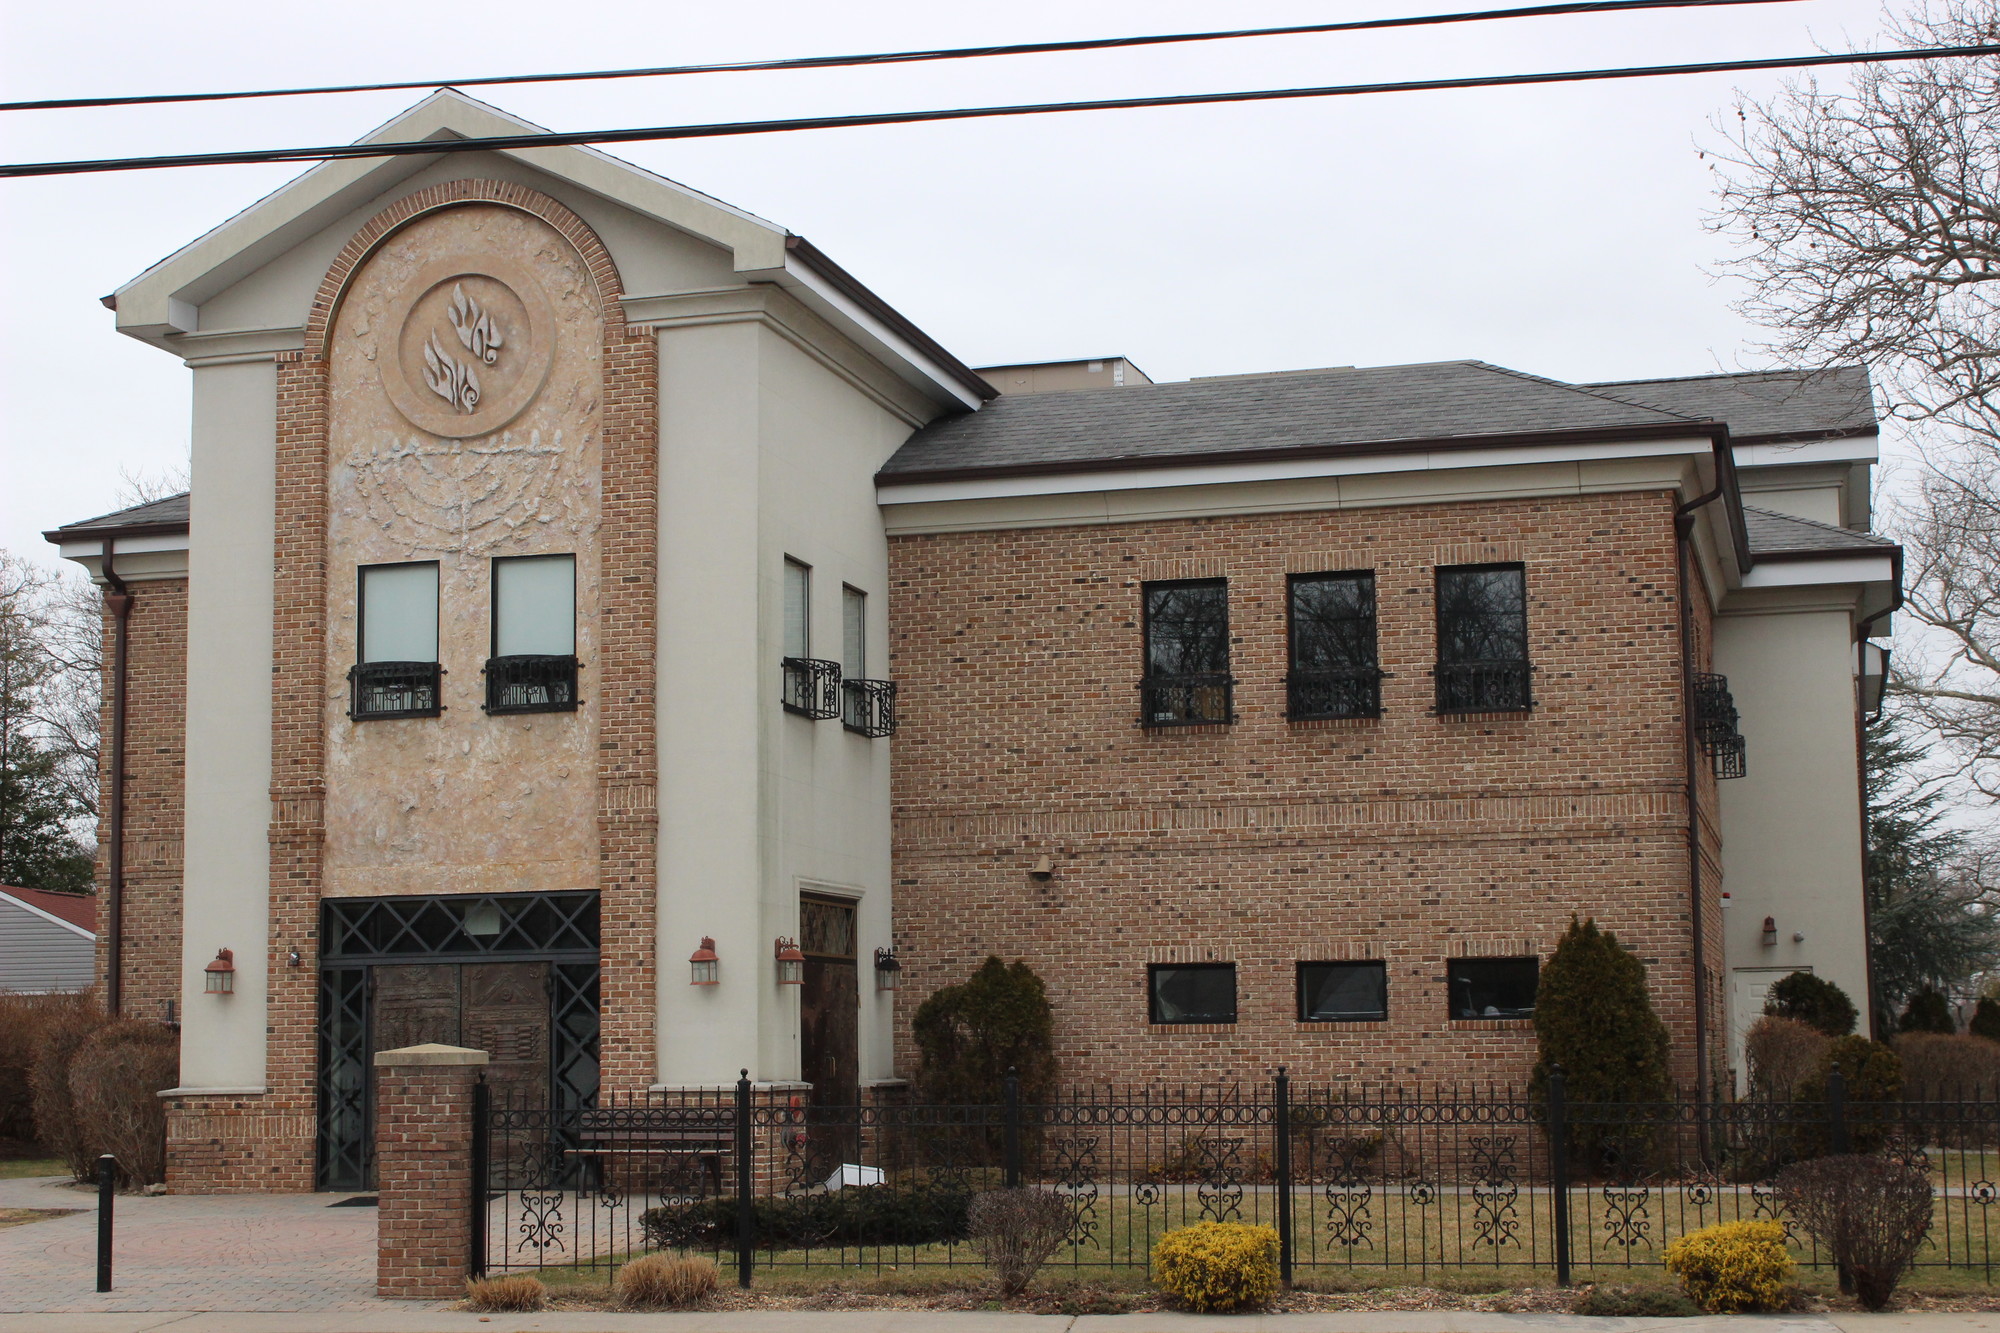 Congregation Aish Kodesh, on Woodmere Place in Woodmere, is creating a program to train some of its congregants as security people.